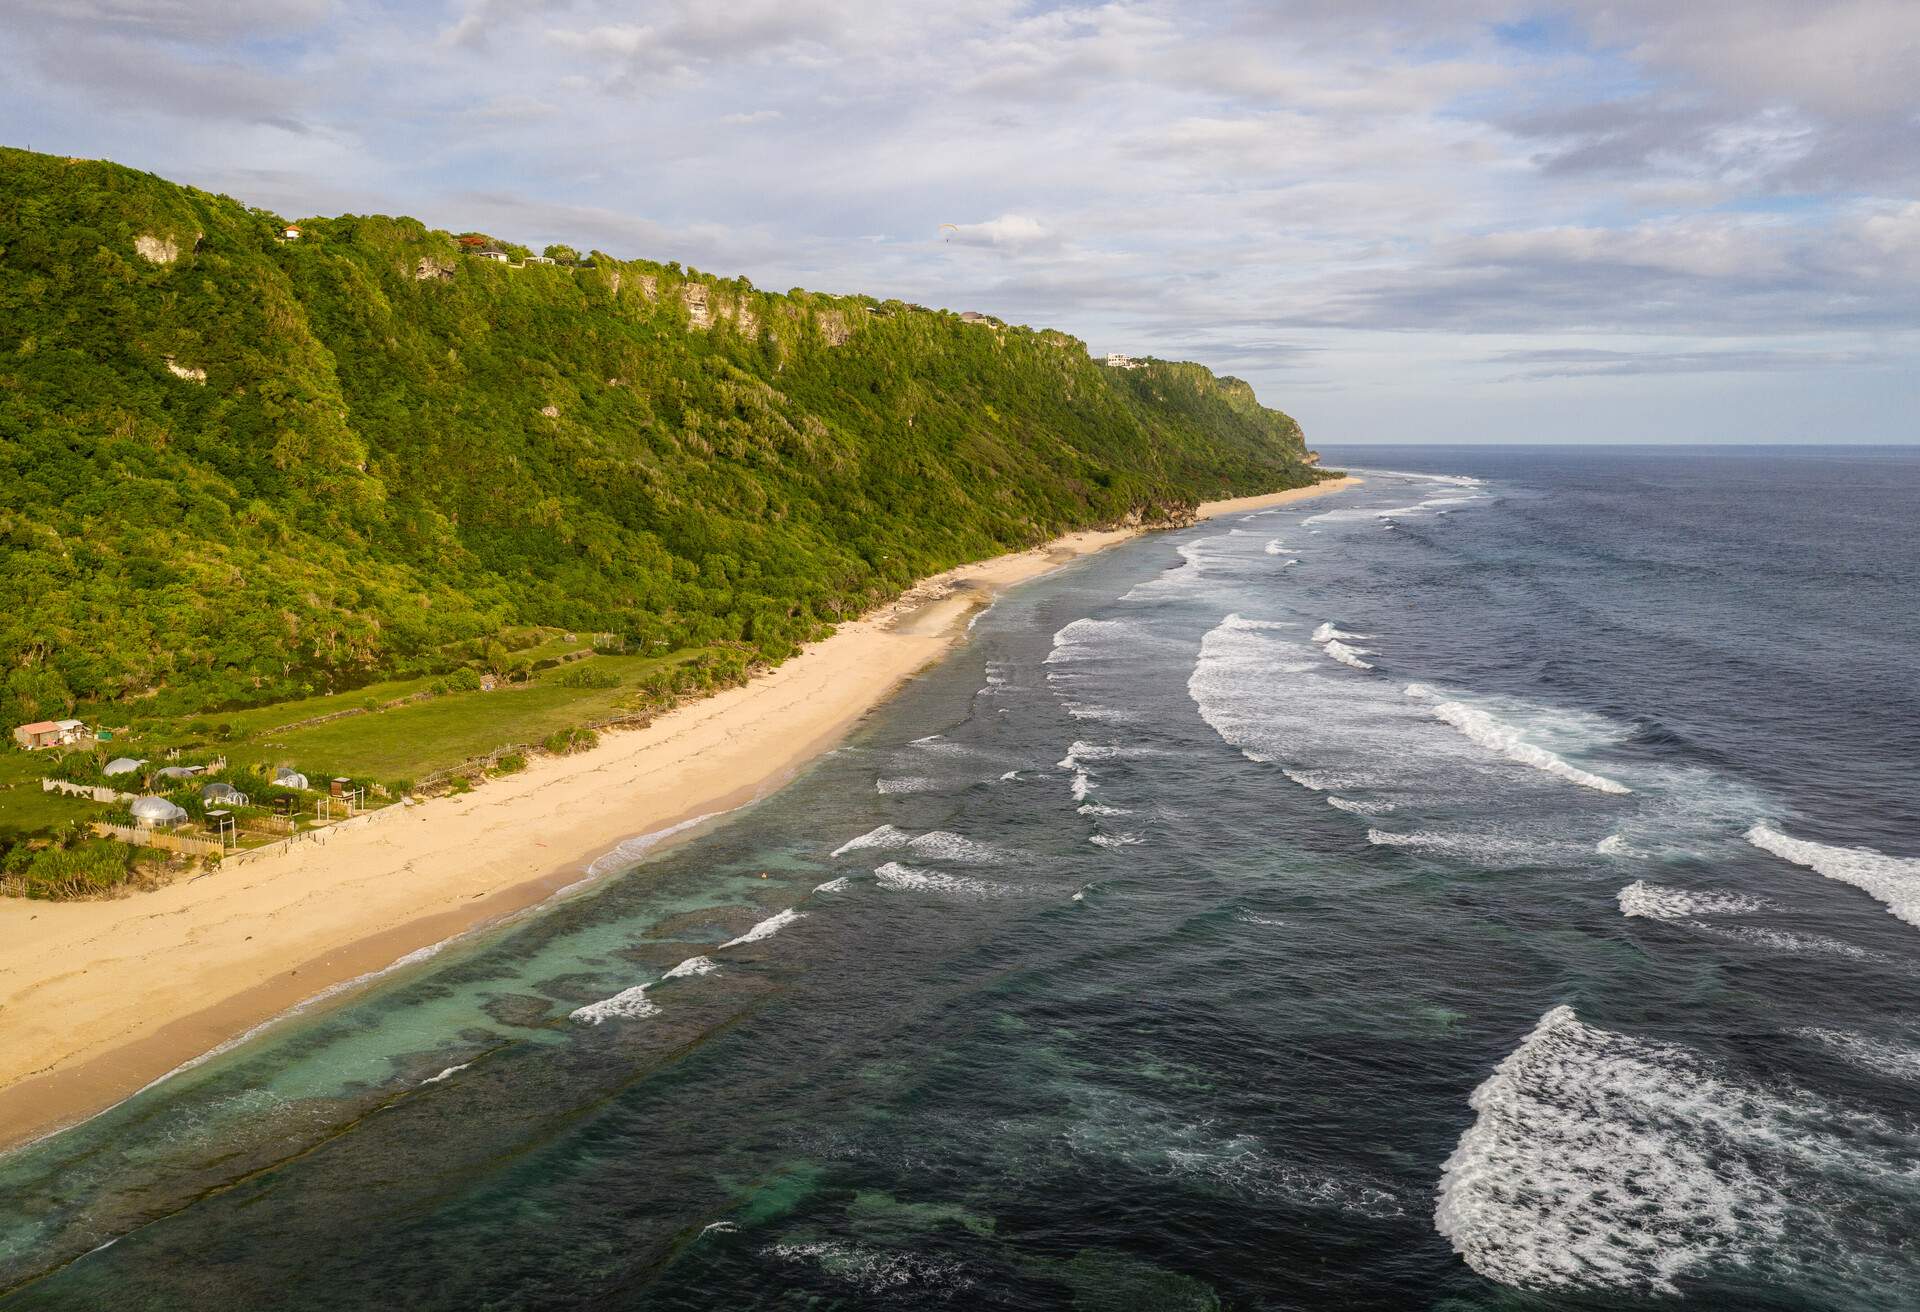 Aerial view of the famous Nyang Nyang beach in the south part of the Bukit Peninsula in Bali in Indonesia